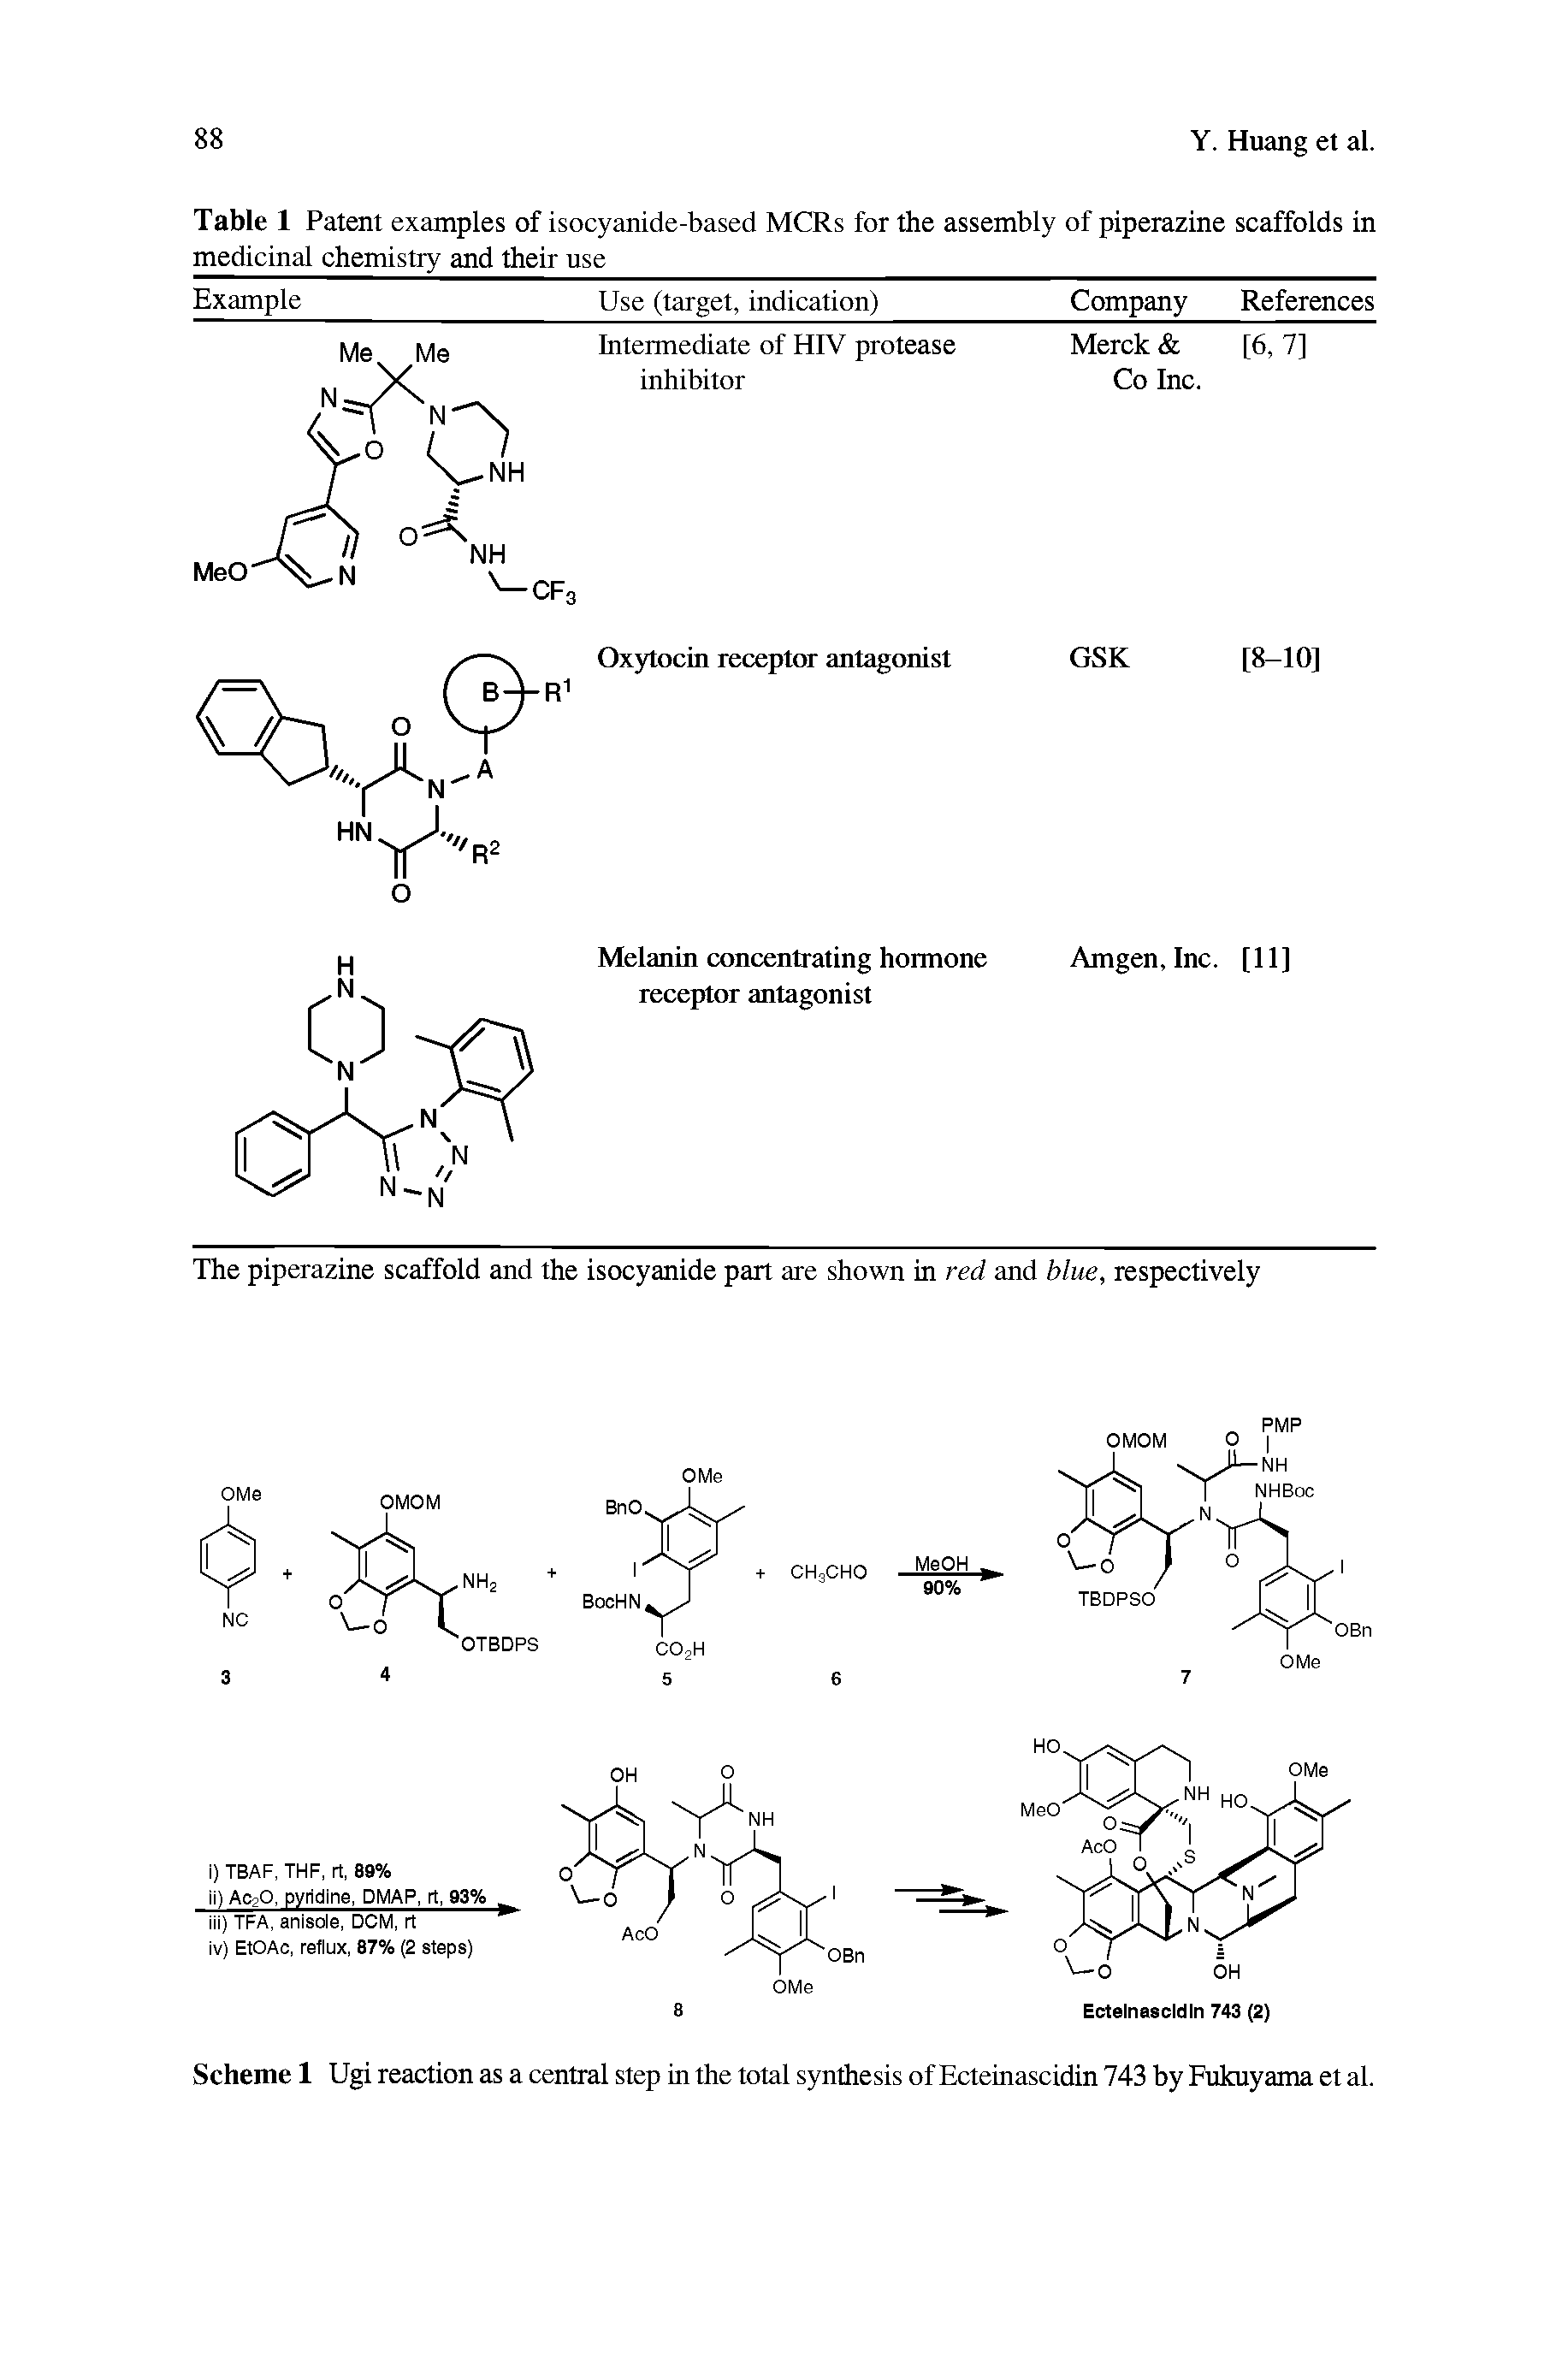 Table 1 Patent examples of isocyanide-based MCRs for the assembly of piperazine scaffolds in medicinal chemistry and their use...